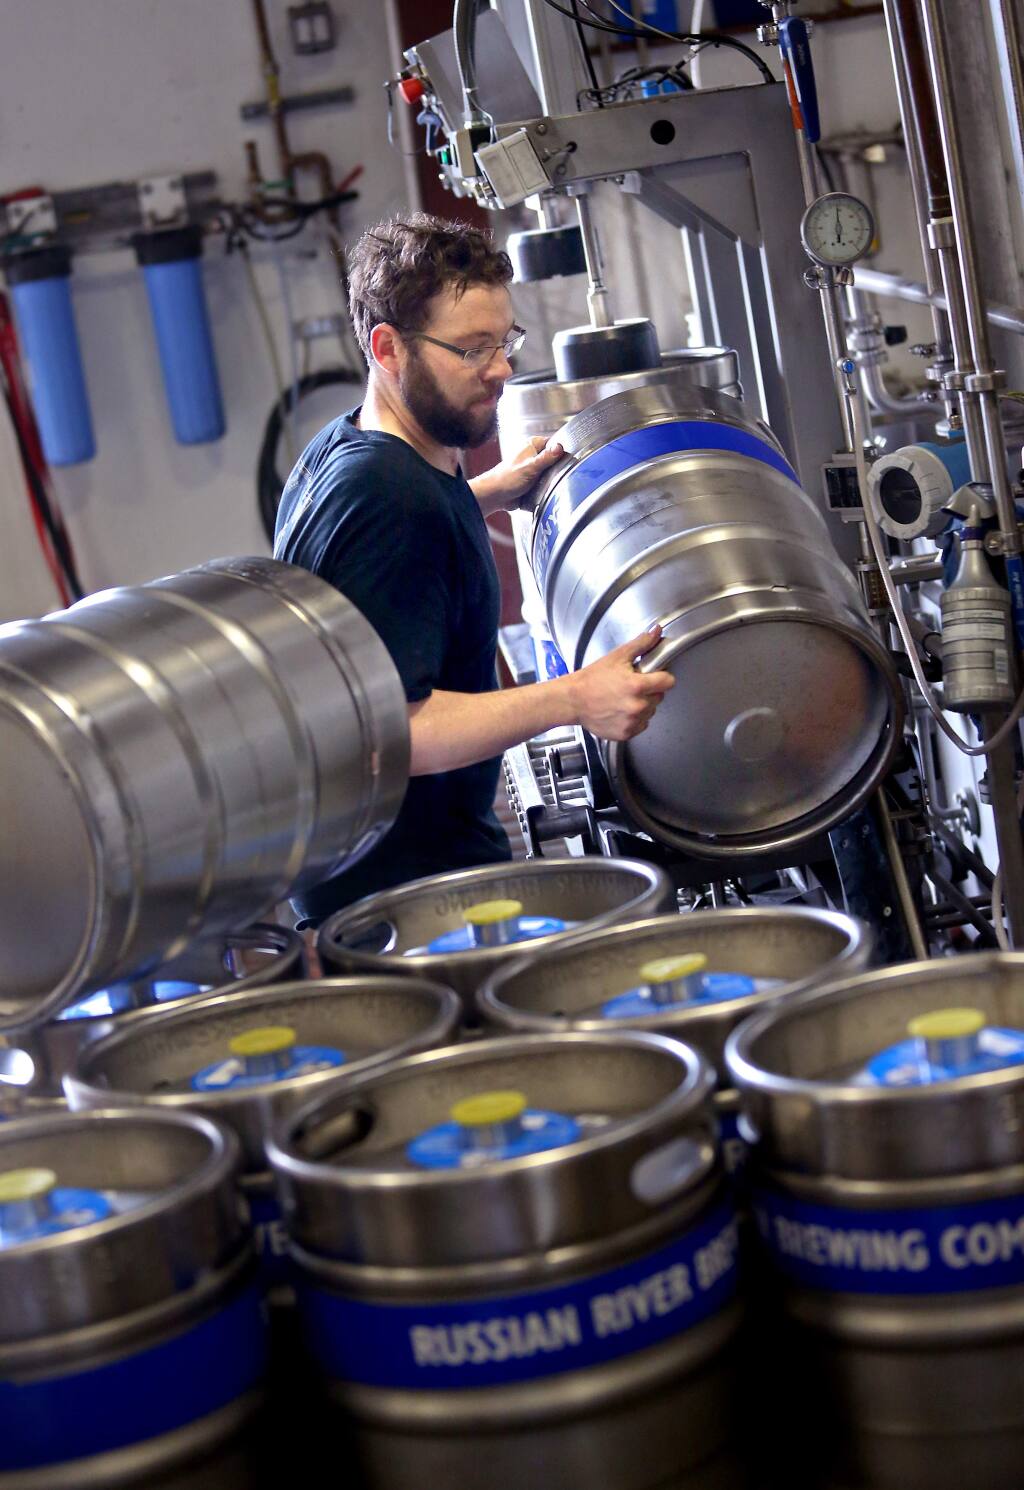 Danny Chamoff fills kegs with Pliny the Younger at the Russian River Brewing Company facility in Santa Rosa on Thursday, February 5, 2015. (Christopher Chung/ The Press Democrat)